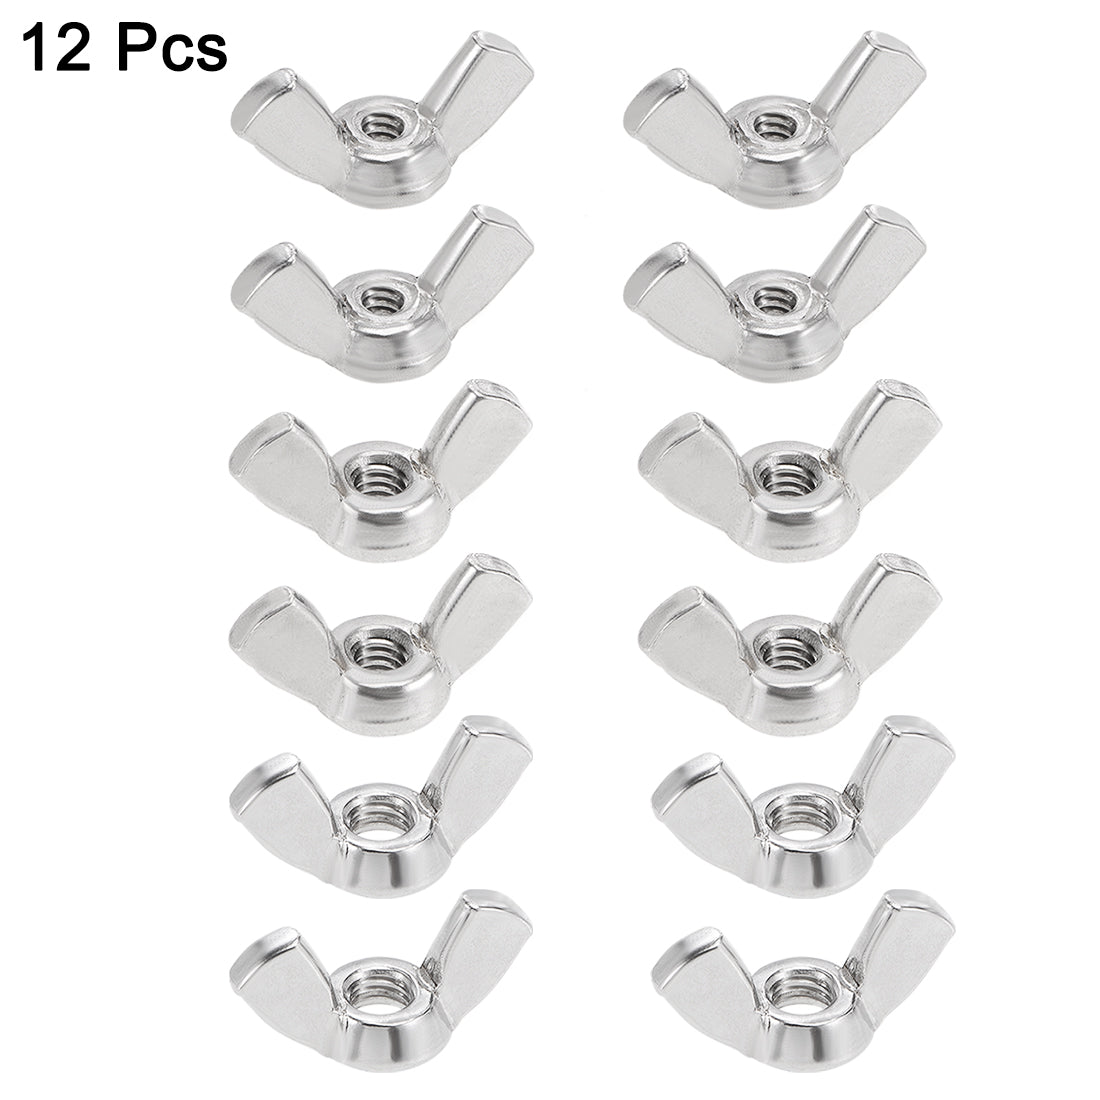 uxcell Uxcell 6-32 8-32 10-32 Wing Nuts 304 Stainless Steel Shutters Butterfly Nut Hand Twist Tighten Fasteners Parts 12pcs